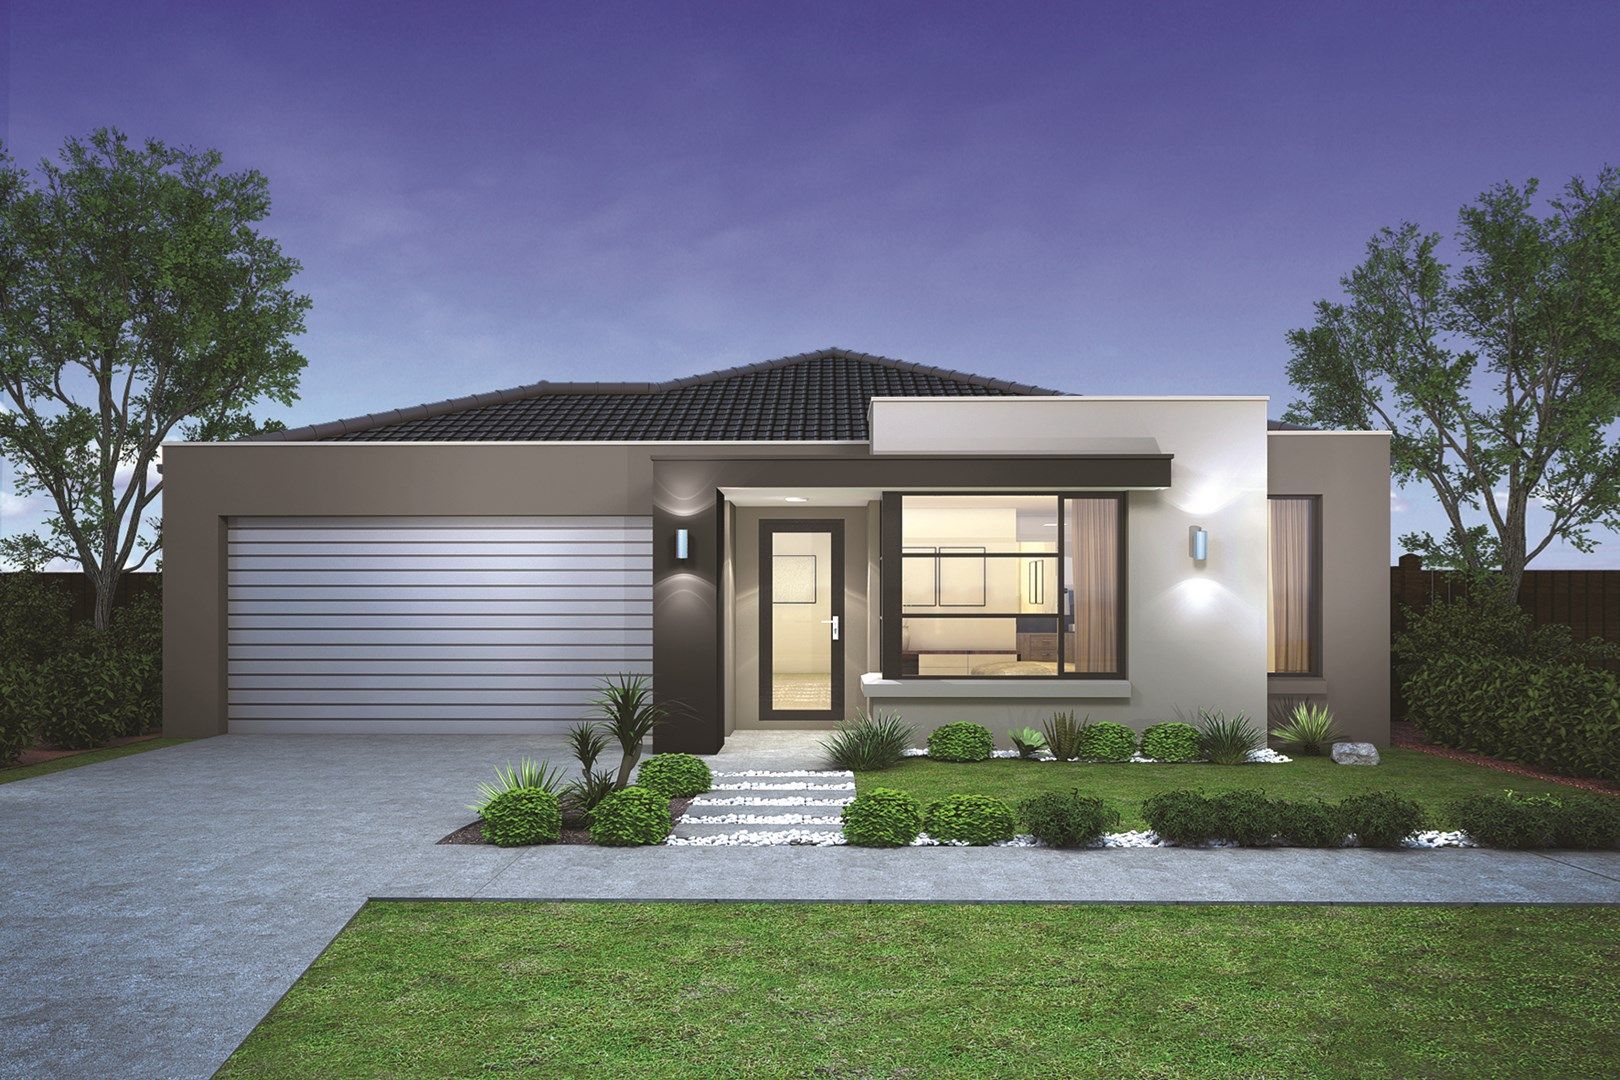 3 bedrooms New House & Land in Lot 716 Clipstone Crescent FRASER RISE VIC, 3336